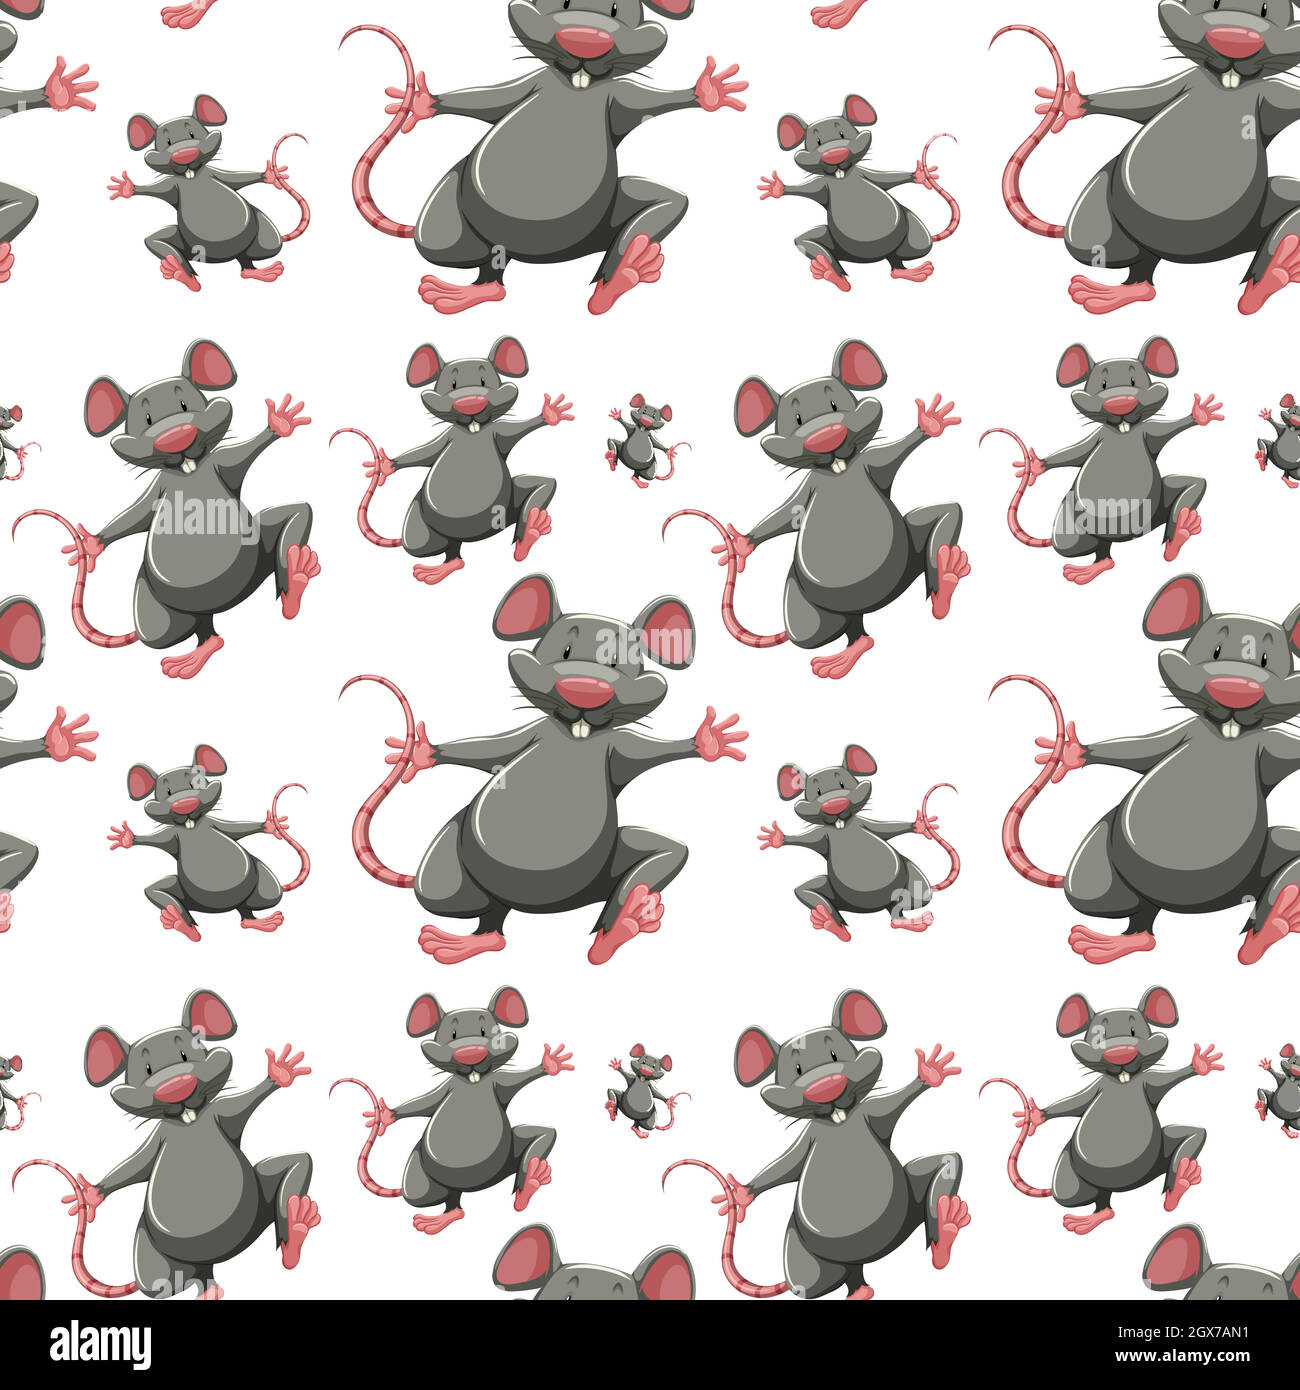 Seamless background with many rats Stock Vector